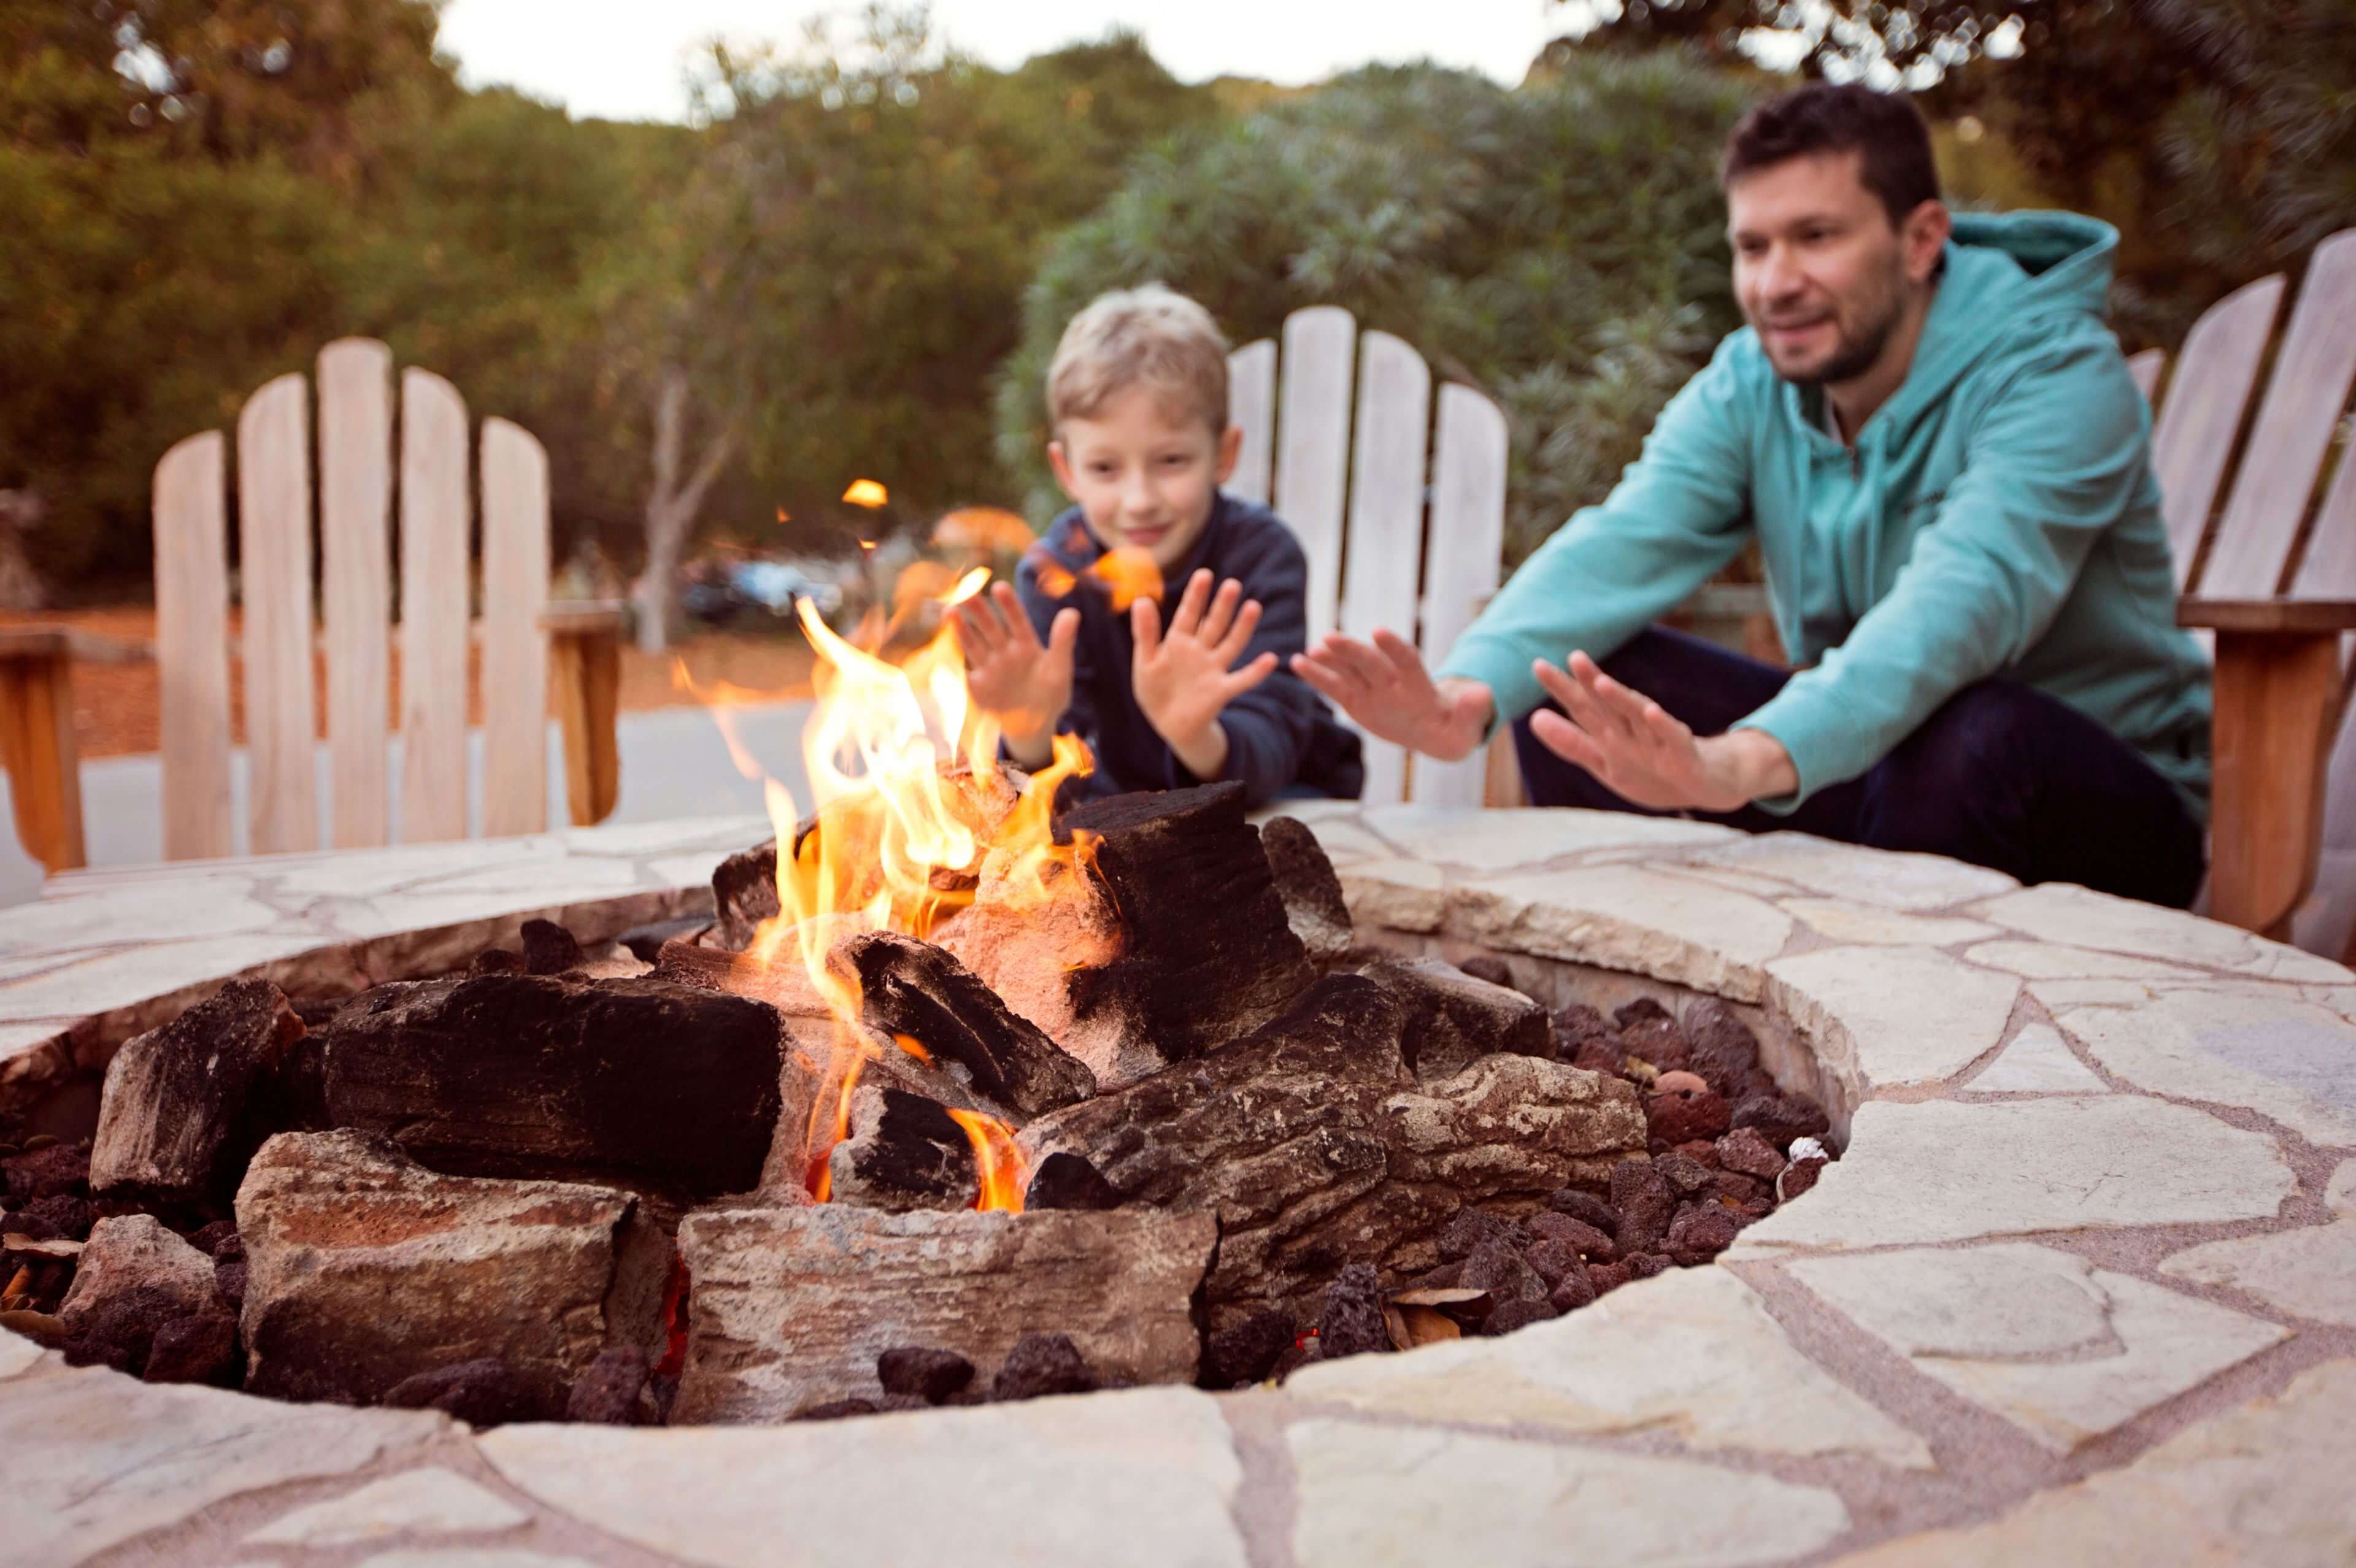 Father and son around outdoor fire pit with hands outstretched to warm up